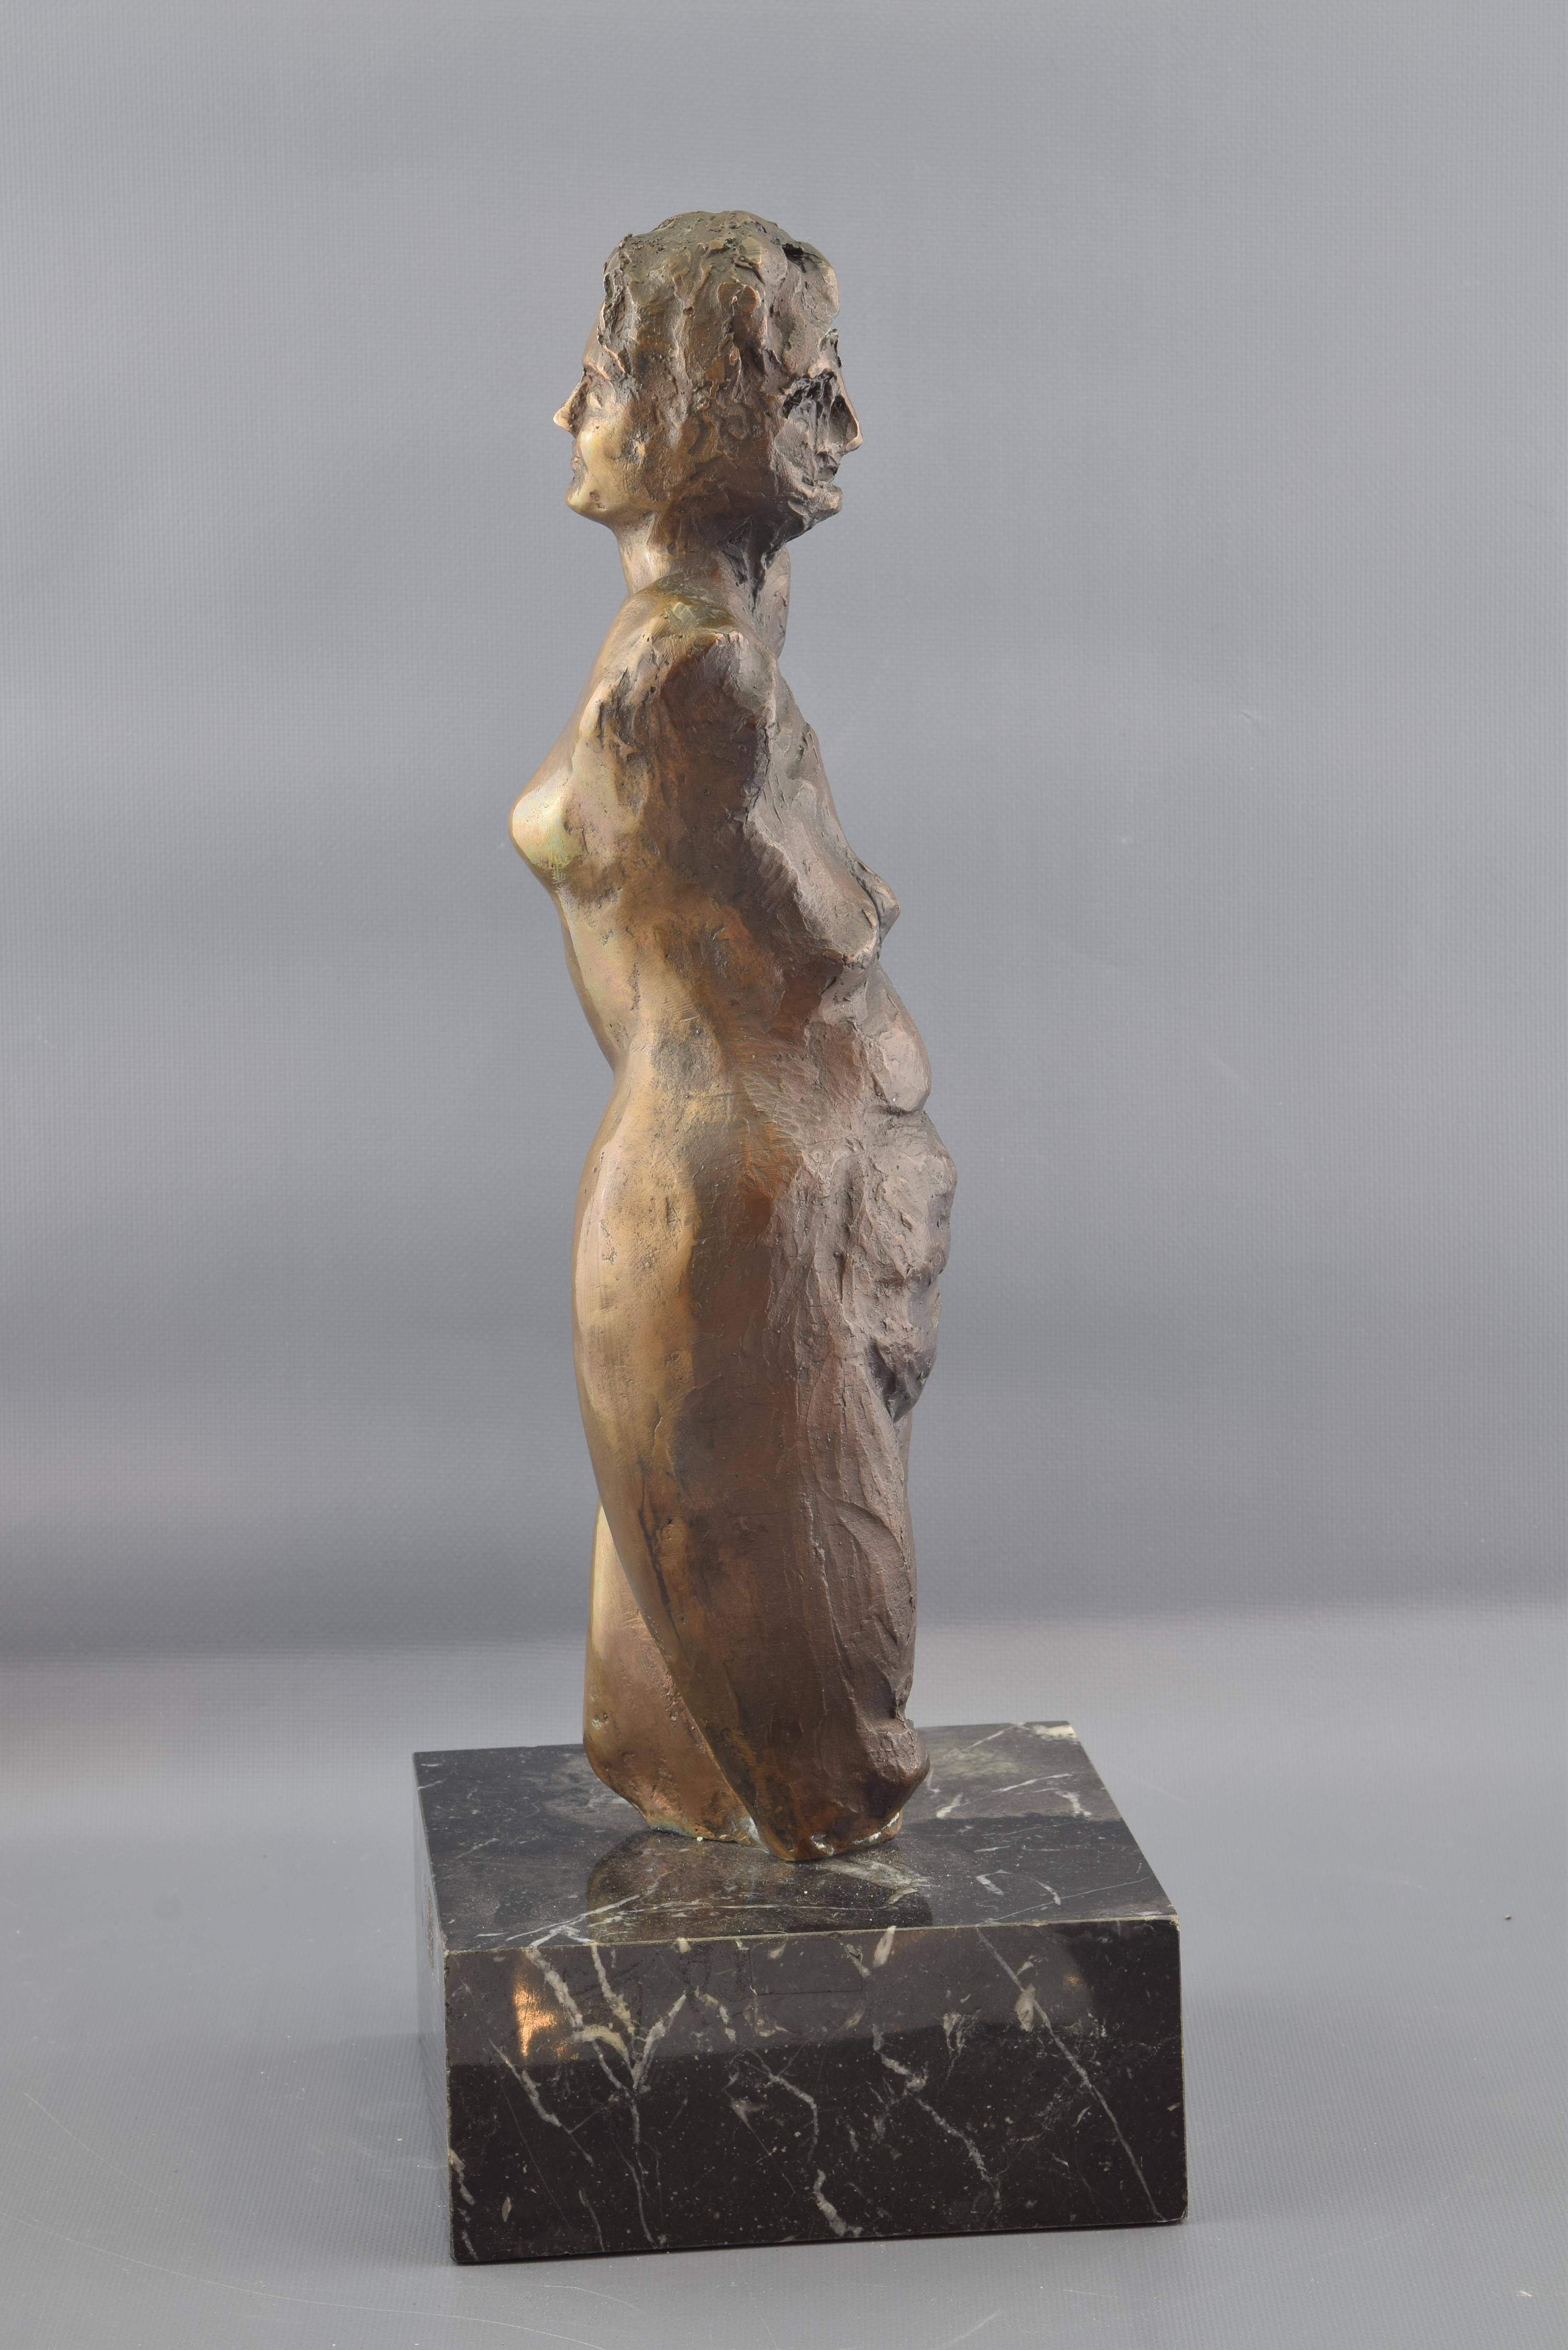 Signed and numbered (1/6). VEIGA, Fernando (Madrid, 1943).
Female sculpture placed on a base of dark stone in which a young girl is shown kneeling upwards and without her arms (remembering the Venus de Milo, for example, and adding the interesting